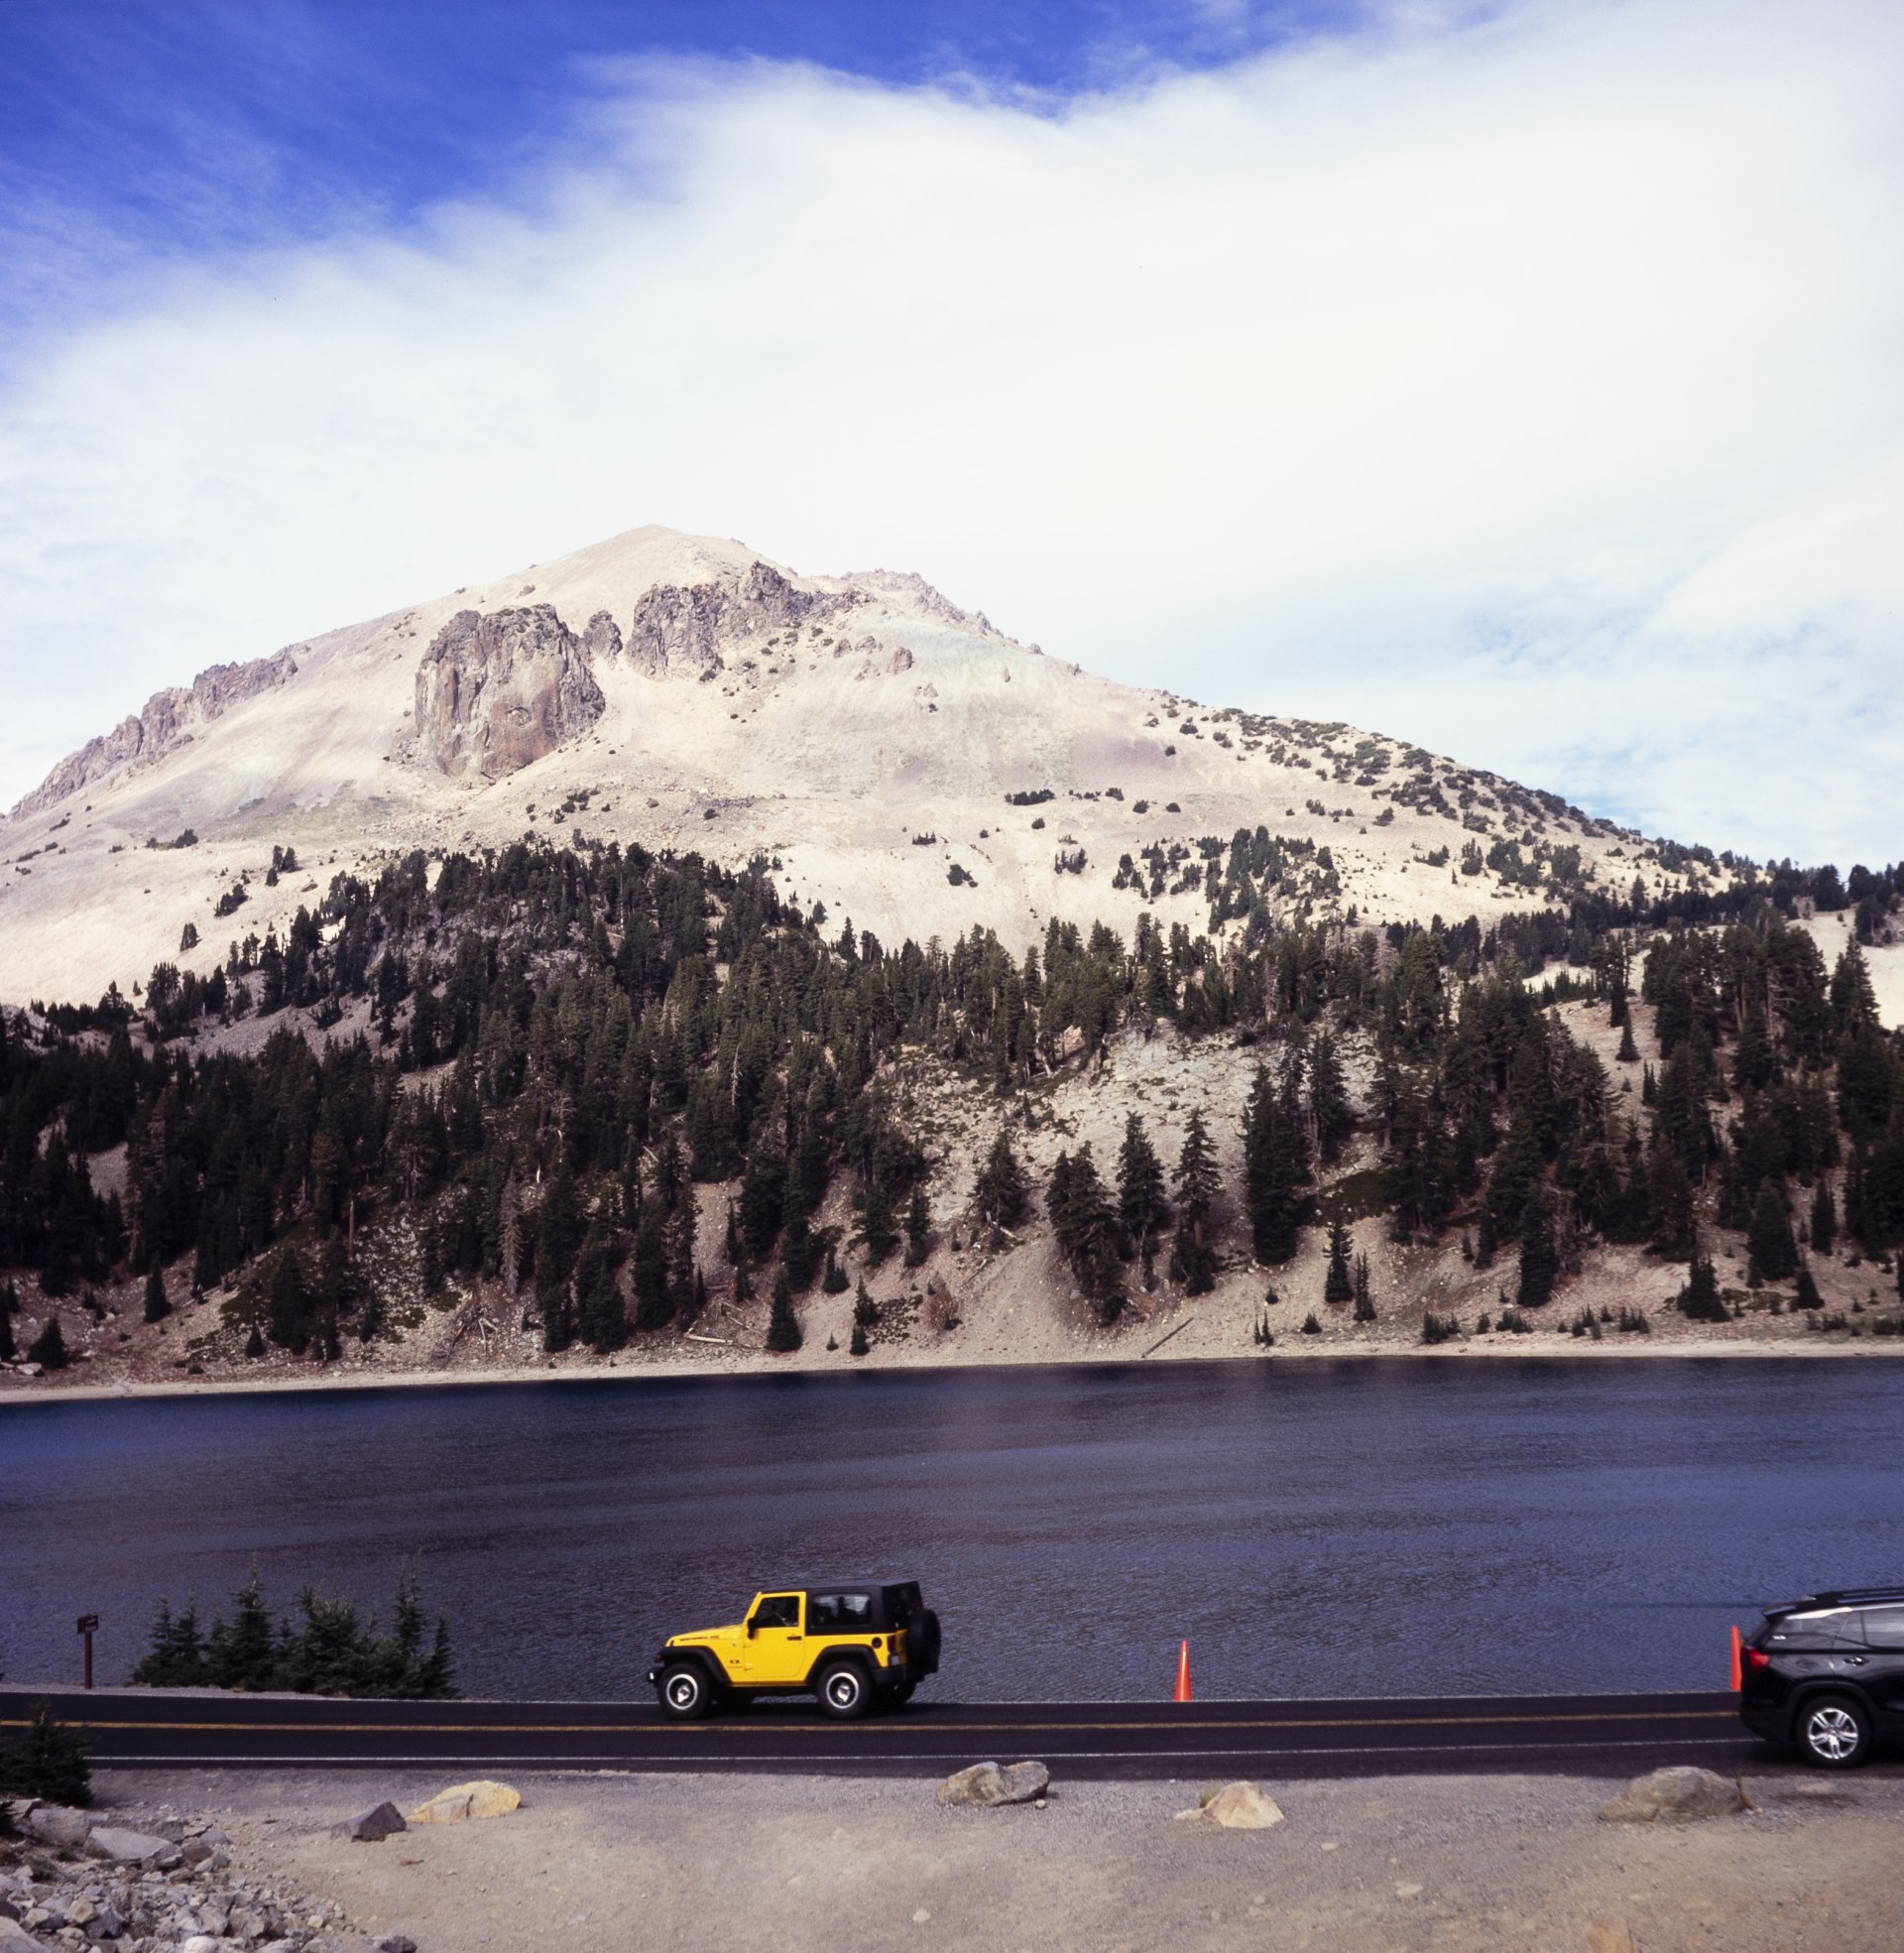 Interestingly enough, the pull outs by Lake Helen are actually <em>closer</em> to Bumpass Hell than the full Bumpass Hell parking lot. Of course, a parking lot is a nicer spot for a vehicle. Note Mt. Lassen in the background, looking resplendent with ´Vulcan's Eye´ prominent.